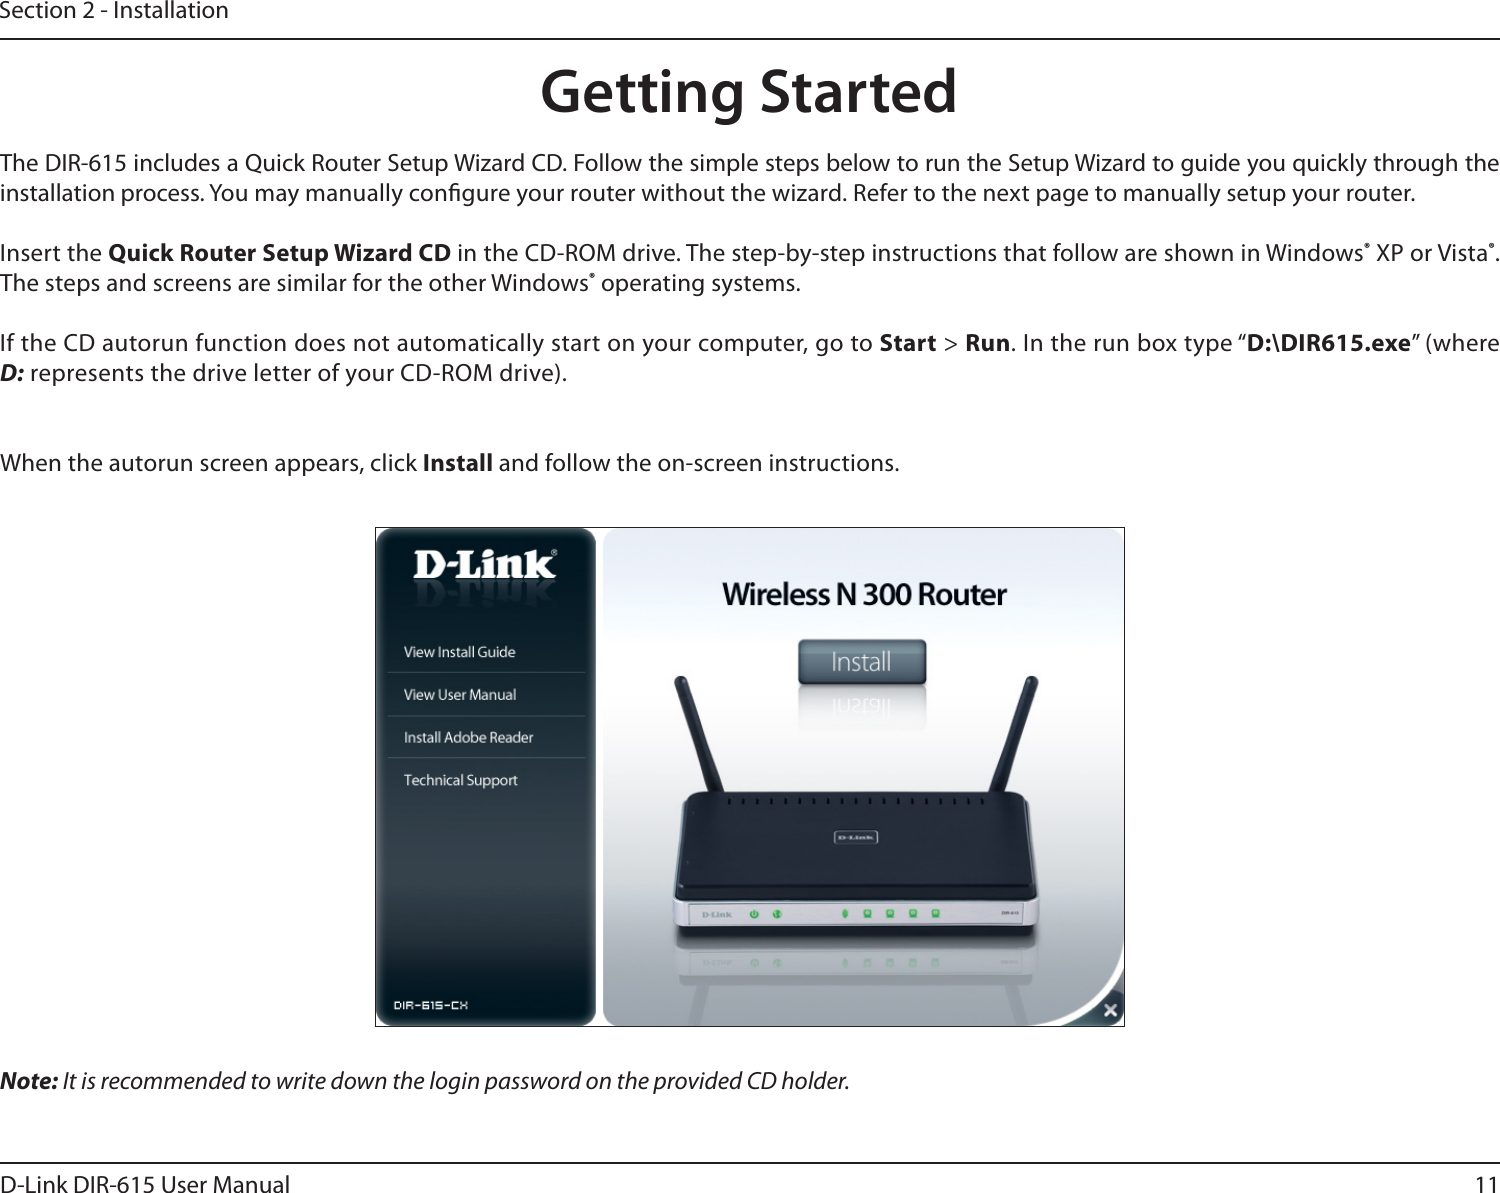 11D-Link DIR-615 User ManualSection 2 - InstallationNote: It is recommended to write down the login password on the provided CD holder.The DIR-615 includes a Quick Router Setup Wizard CD. Follow the simple steps below to run the Setup Wizard to guide you quickly through the installation process. You may manually congure your router without the wizard. Refer to the next page to manually setup your router.Insert the Quick Router Setup Wizard CD in the CD-ROM drive. The step-by-step instructions that follow are shown in Windows® XP or Vista®. The steps and screens are similar for the other Windows® operating systems.If the CD autorun function does not automatically start on your computer, go to Start &gt; Run. In the run box type “D:\DIR615.exe” (where D: represents the drive letter of your CD-ROM drive).When the autorun screen appears, click Install and follow the on-screen instructions. Getting Started